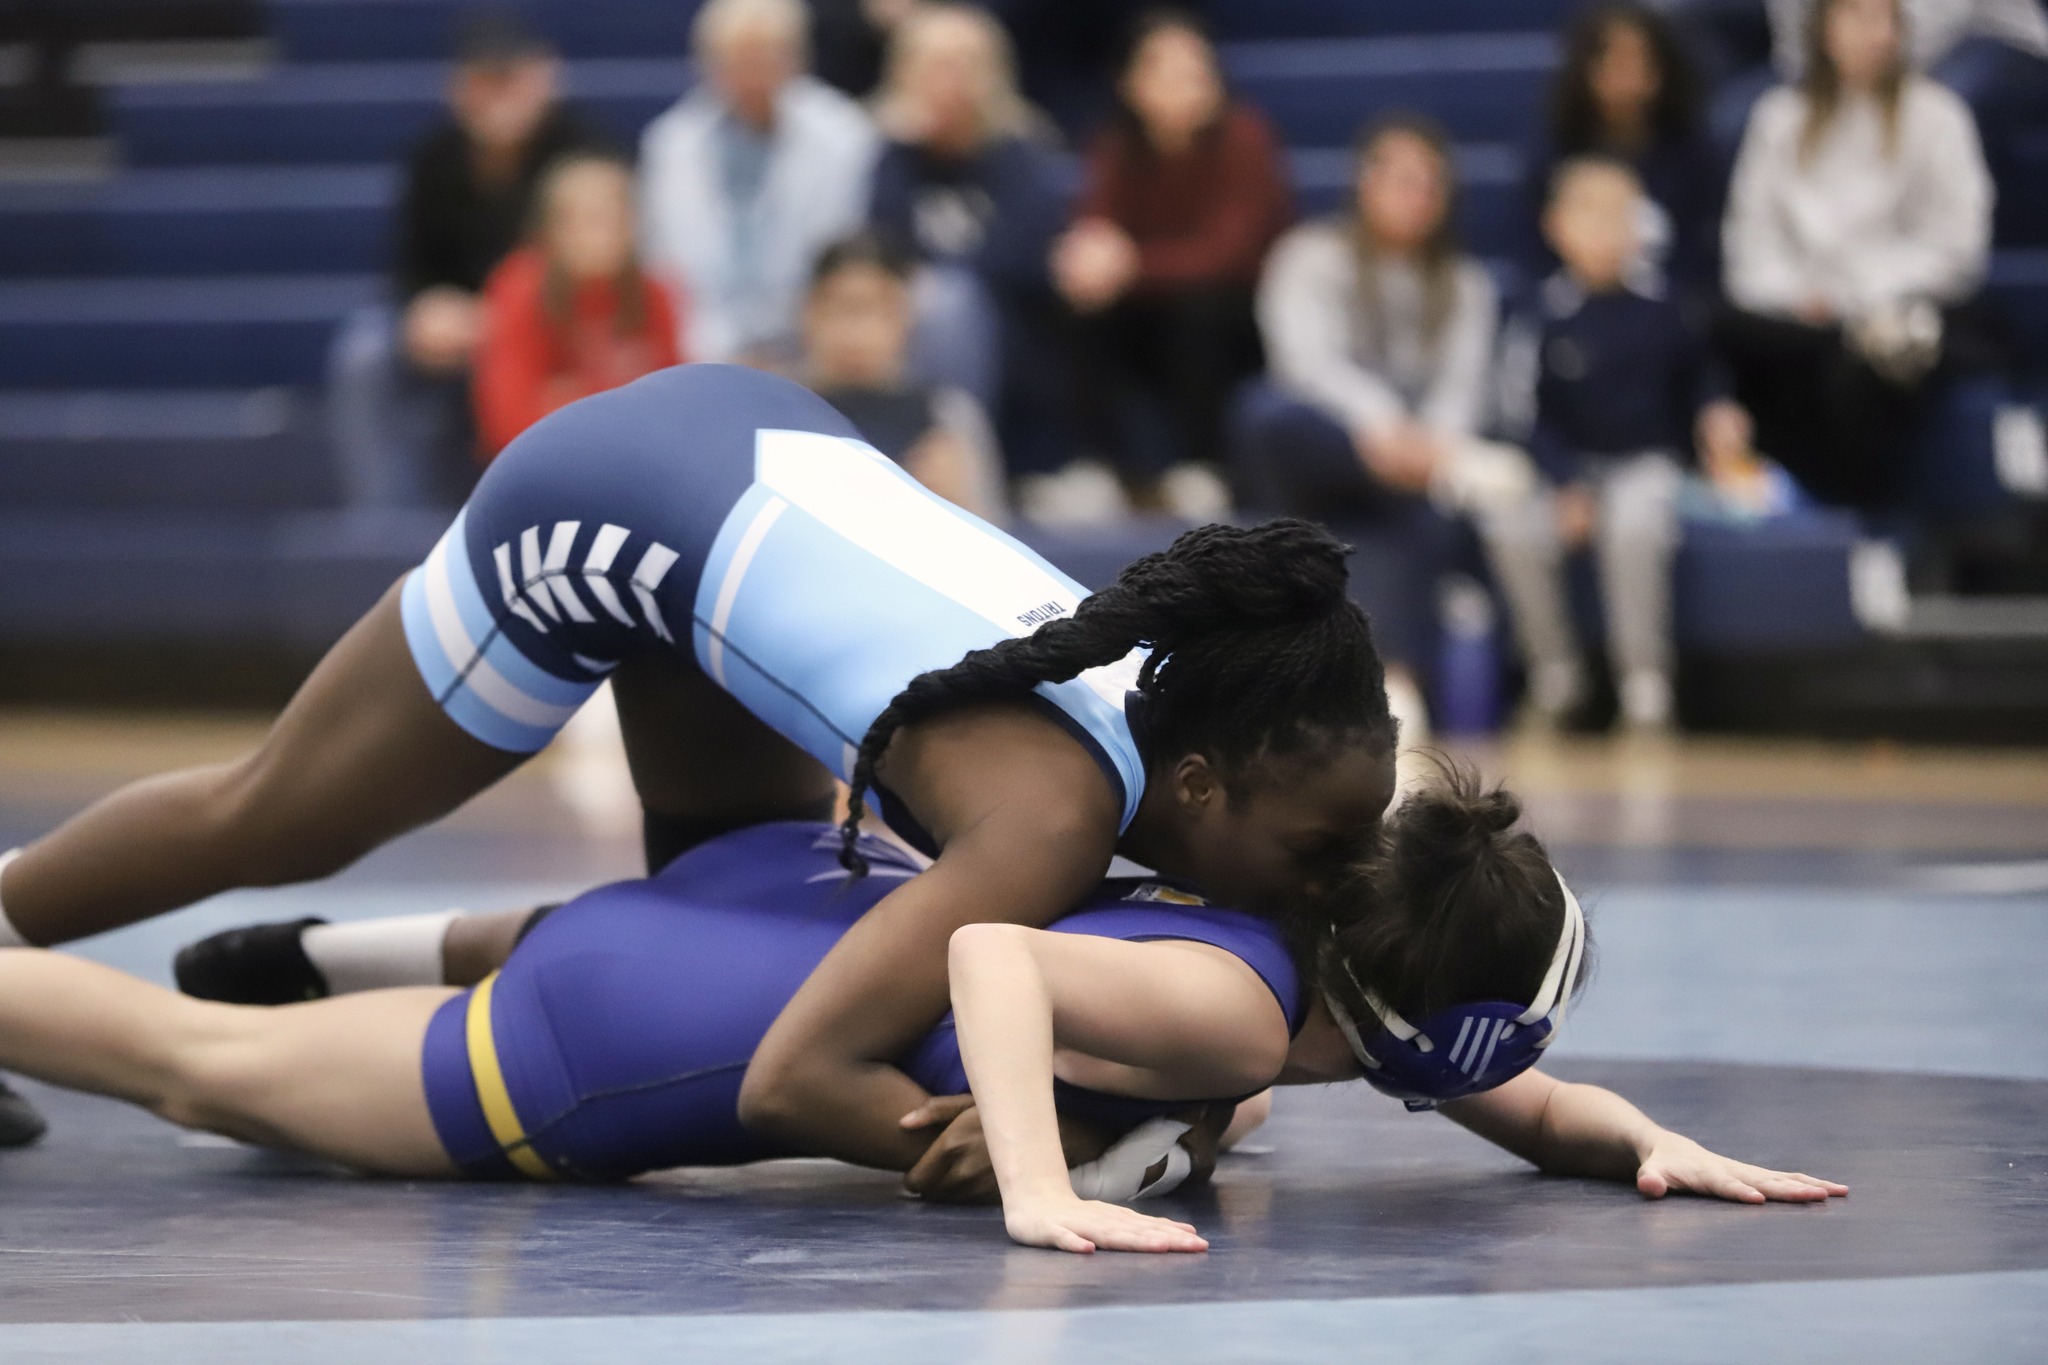 Women's Wrestling competed at the Missouri Valley Open November 17-18